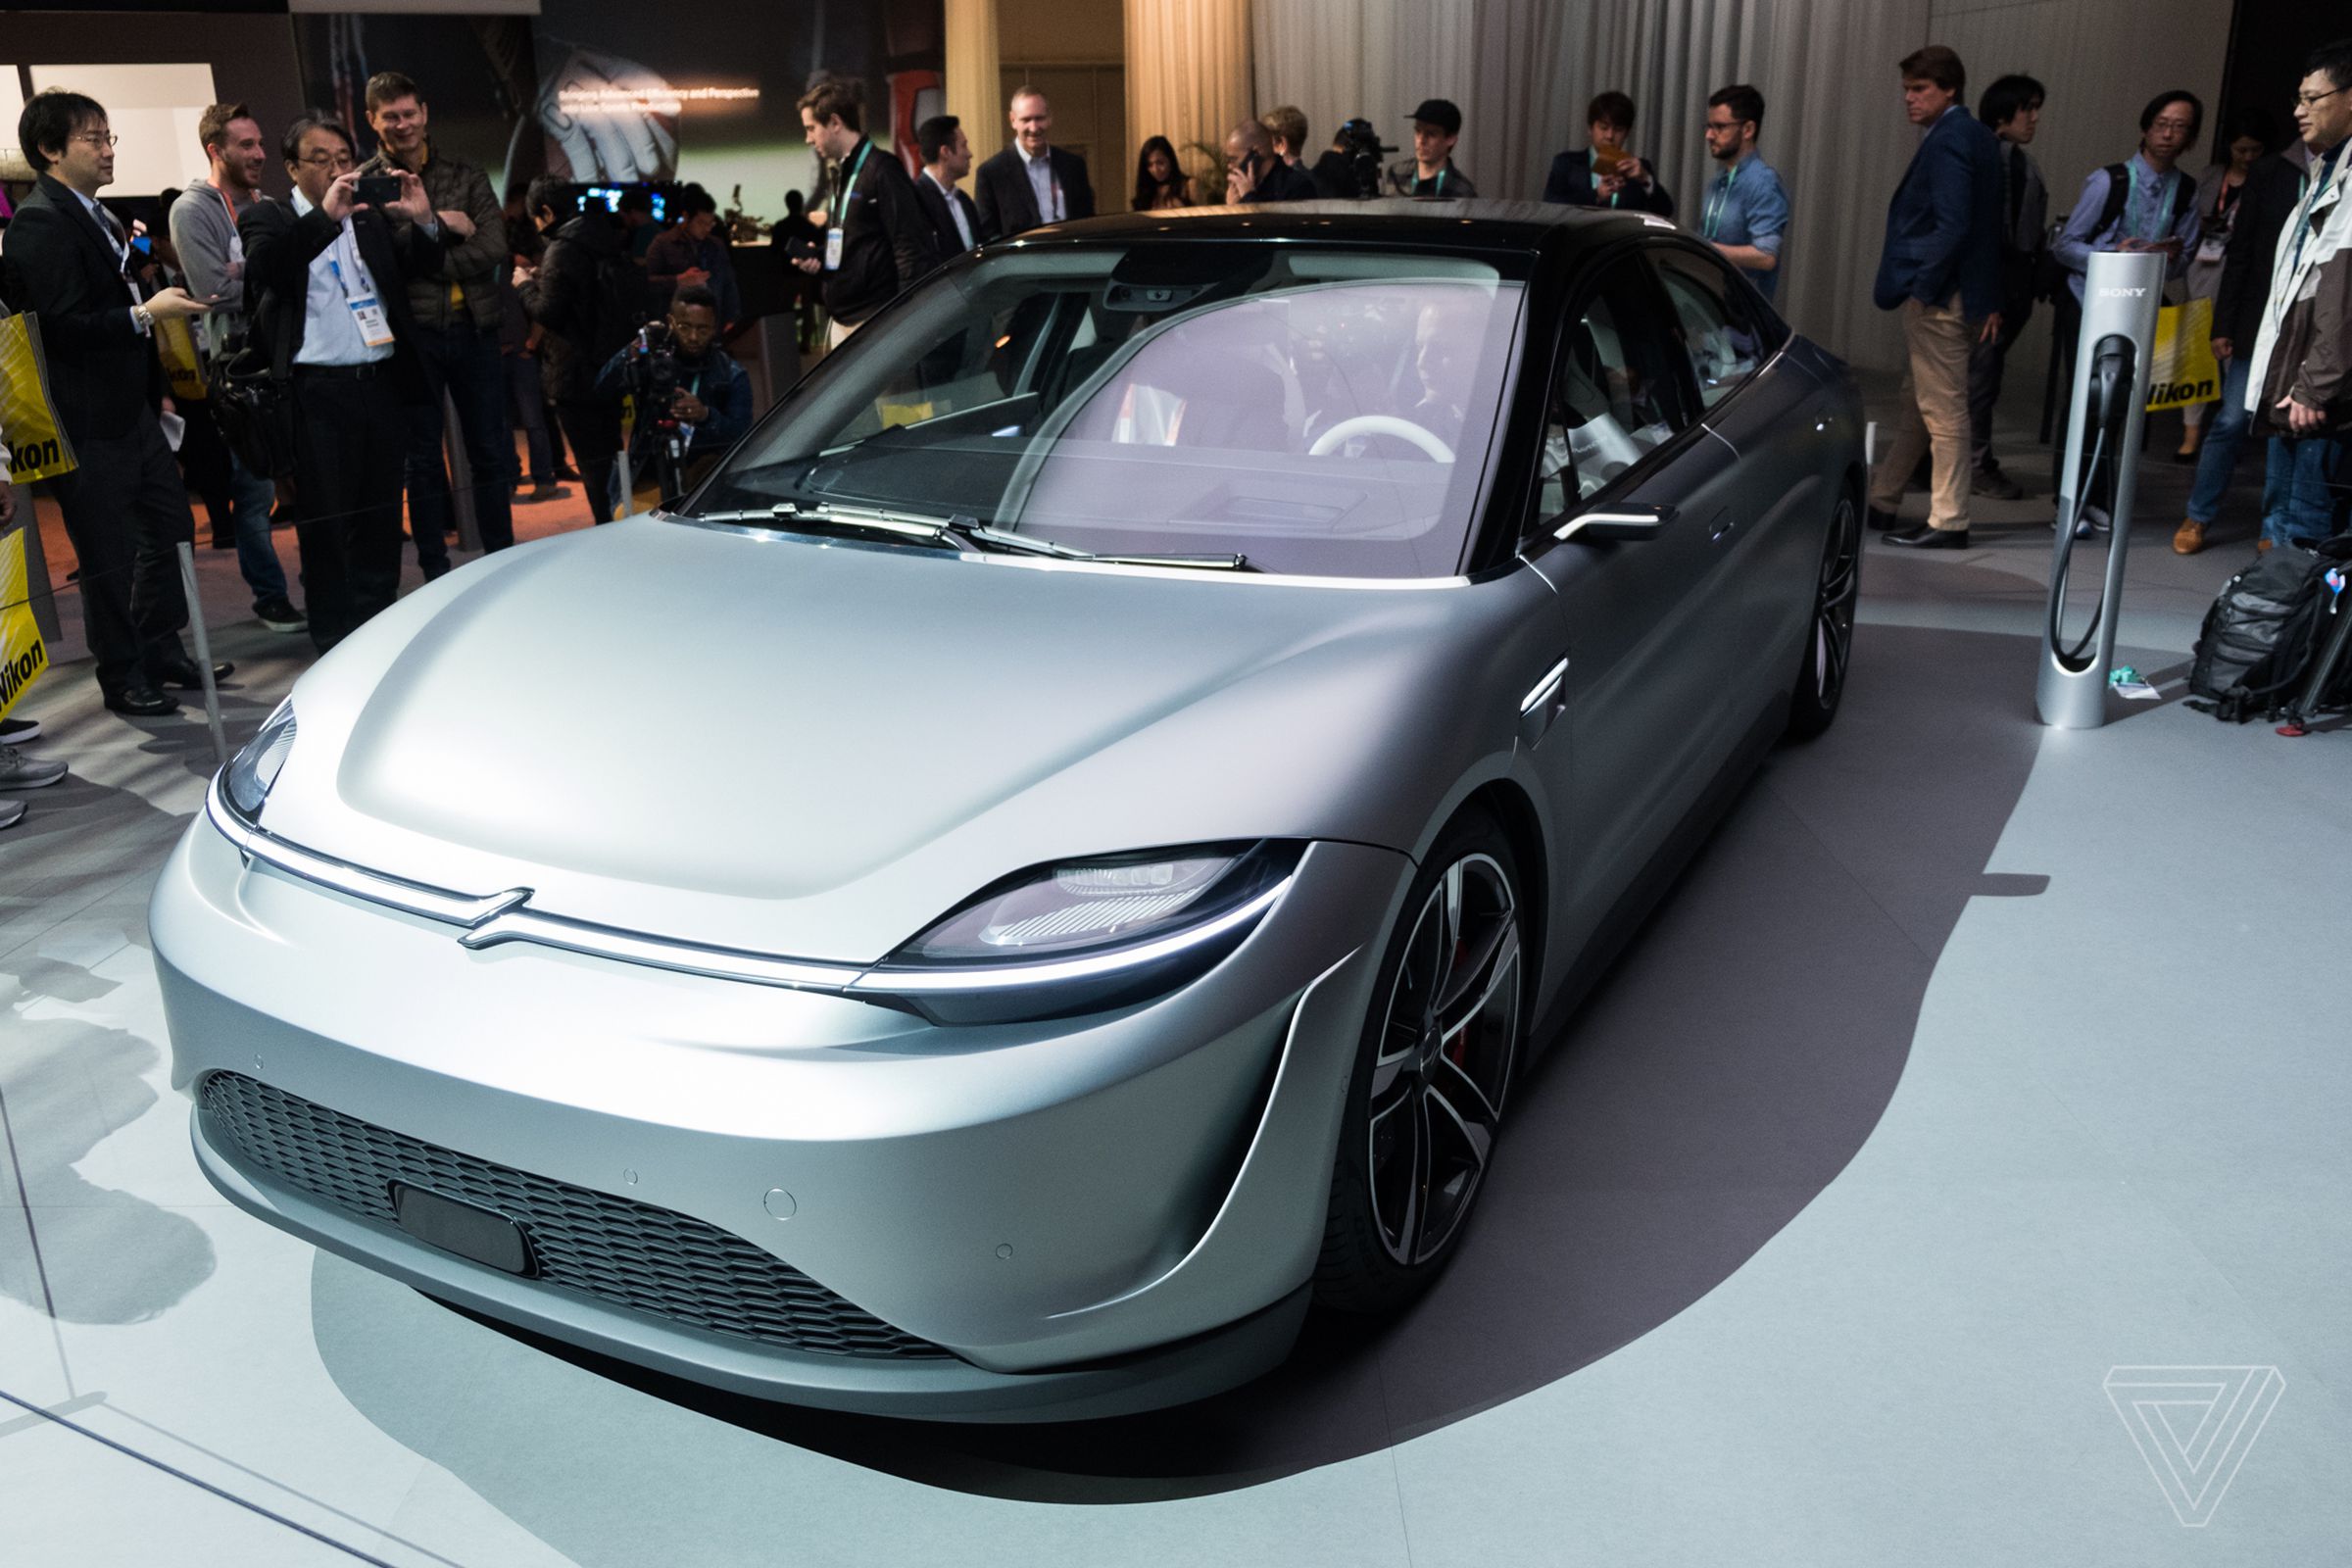 Sony’s Vision-S car is on the CES show floor with lots of people surrounding it. The car, a four-door midsize sedan, is silver with a black top and all-glass roof.